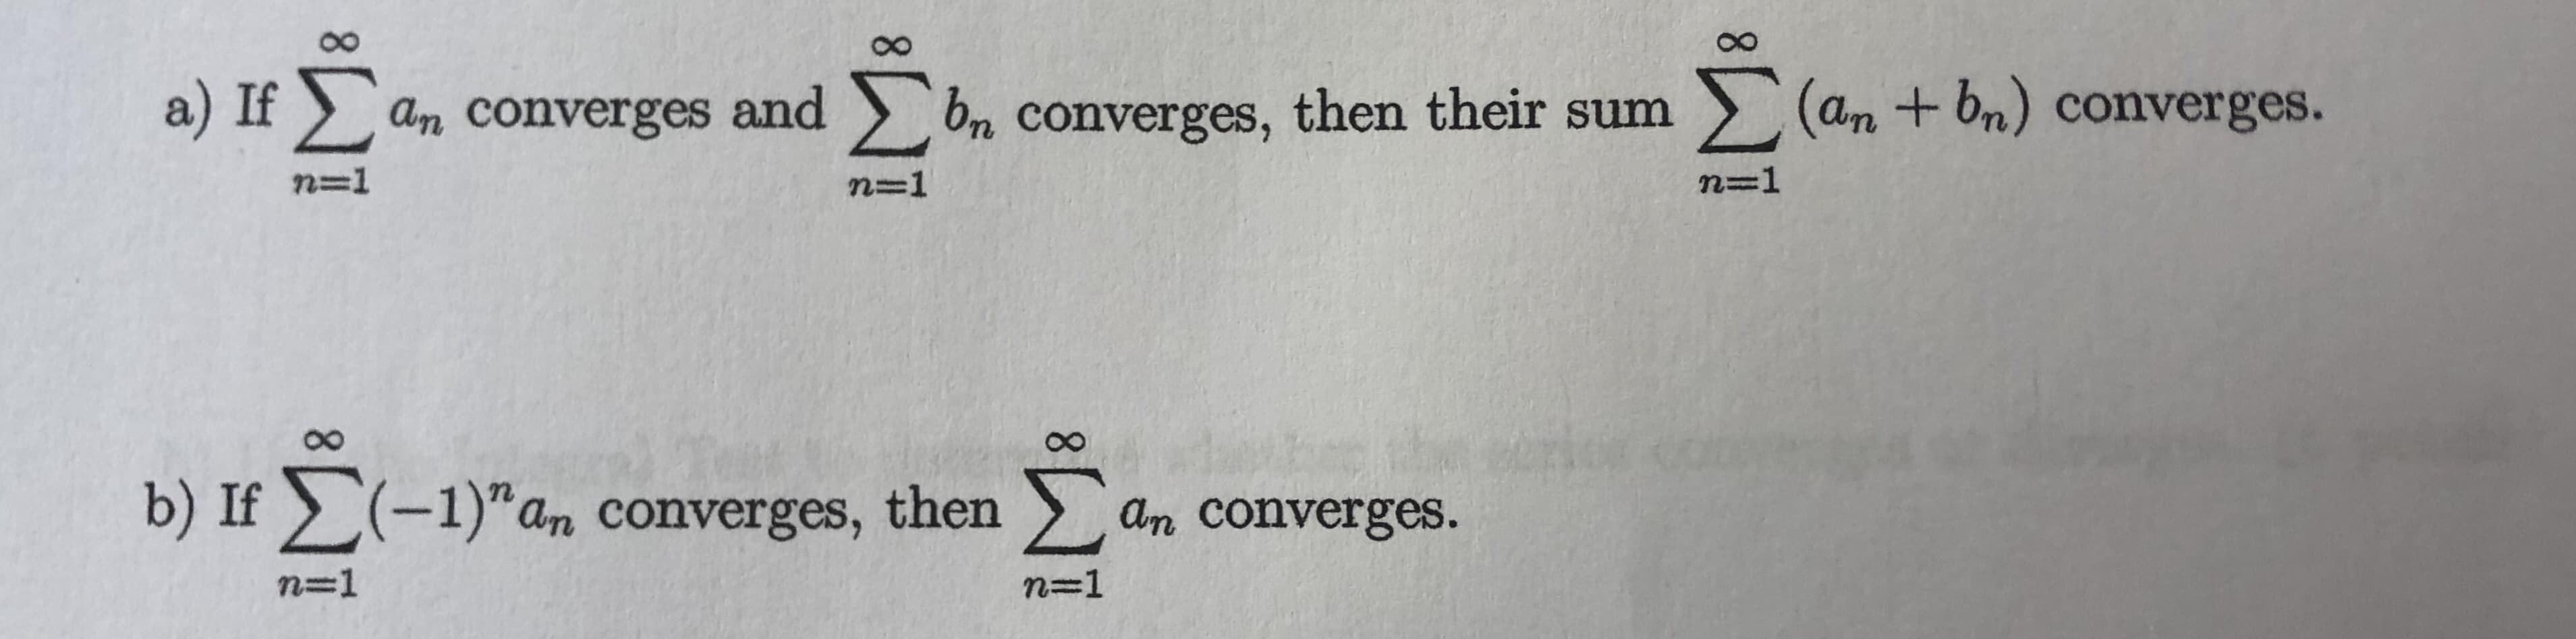 8.
a) If
an converges and bn converges, then their sum
>(an + bn) converges.
n=1
n=1
b) If (-1)"an converges, then an converges.
n=1
n=1
